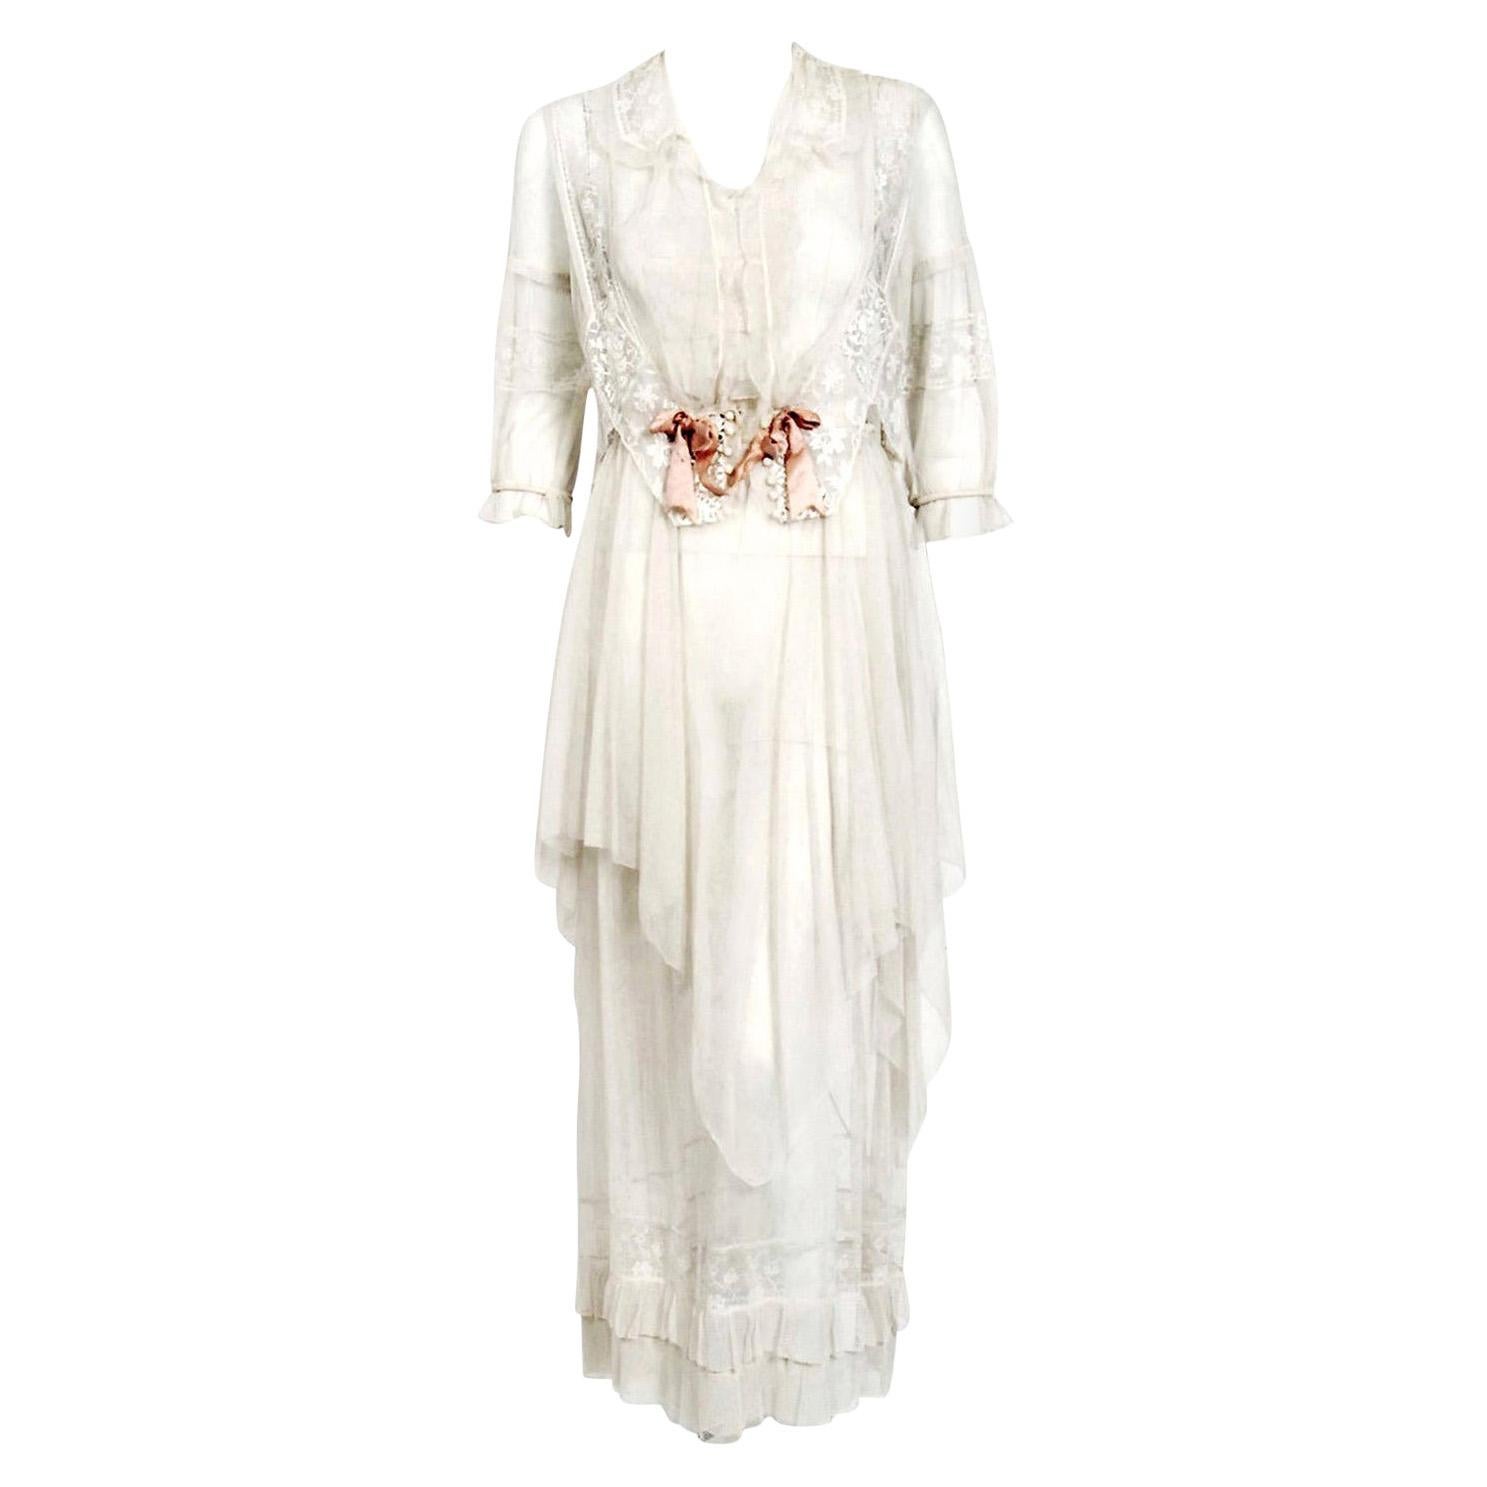 Vintage 1910's Ivory Sheer Embroidered Floral Lace & Tulle Tiered Bridal Gown  For Sale